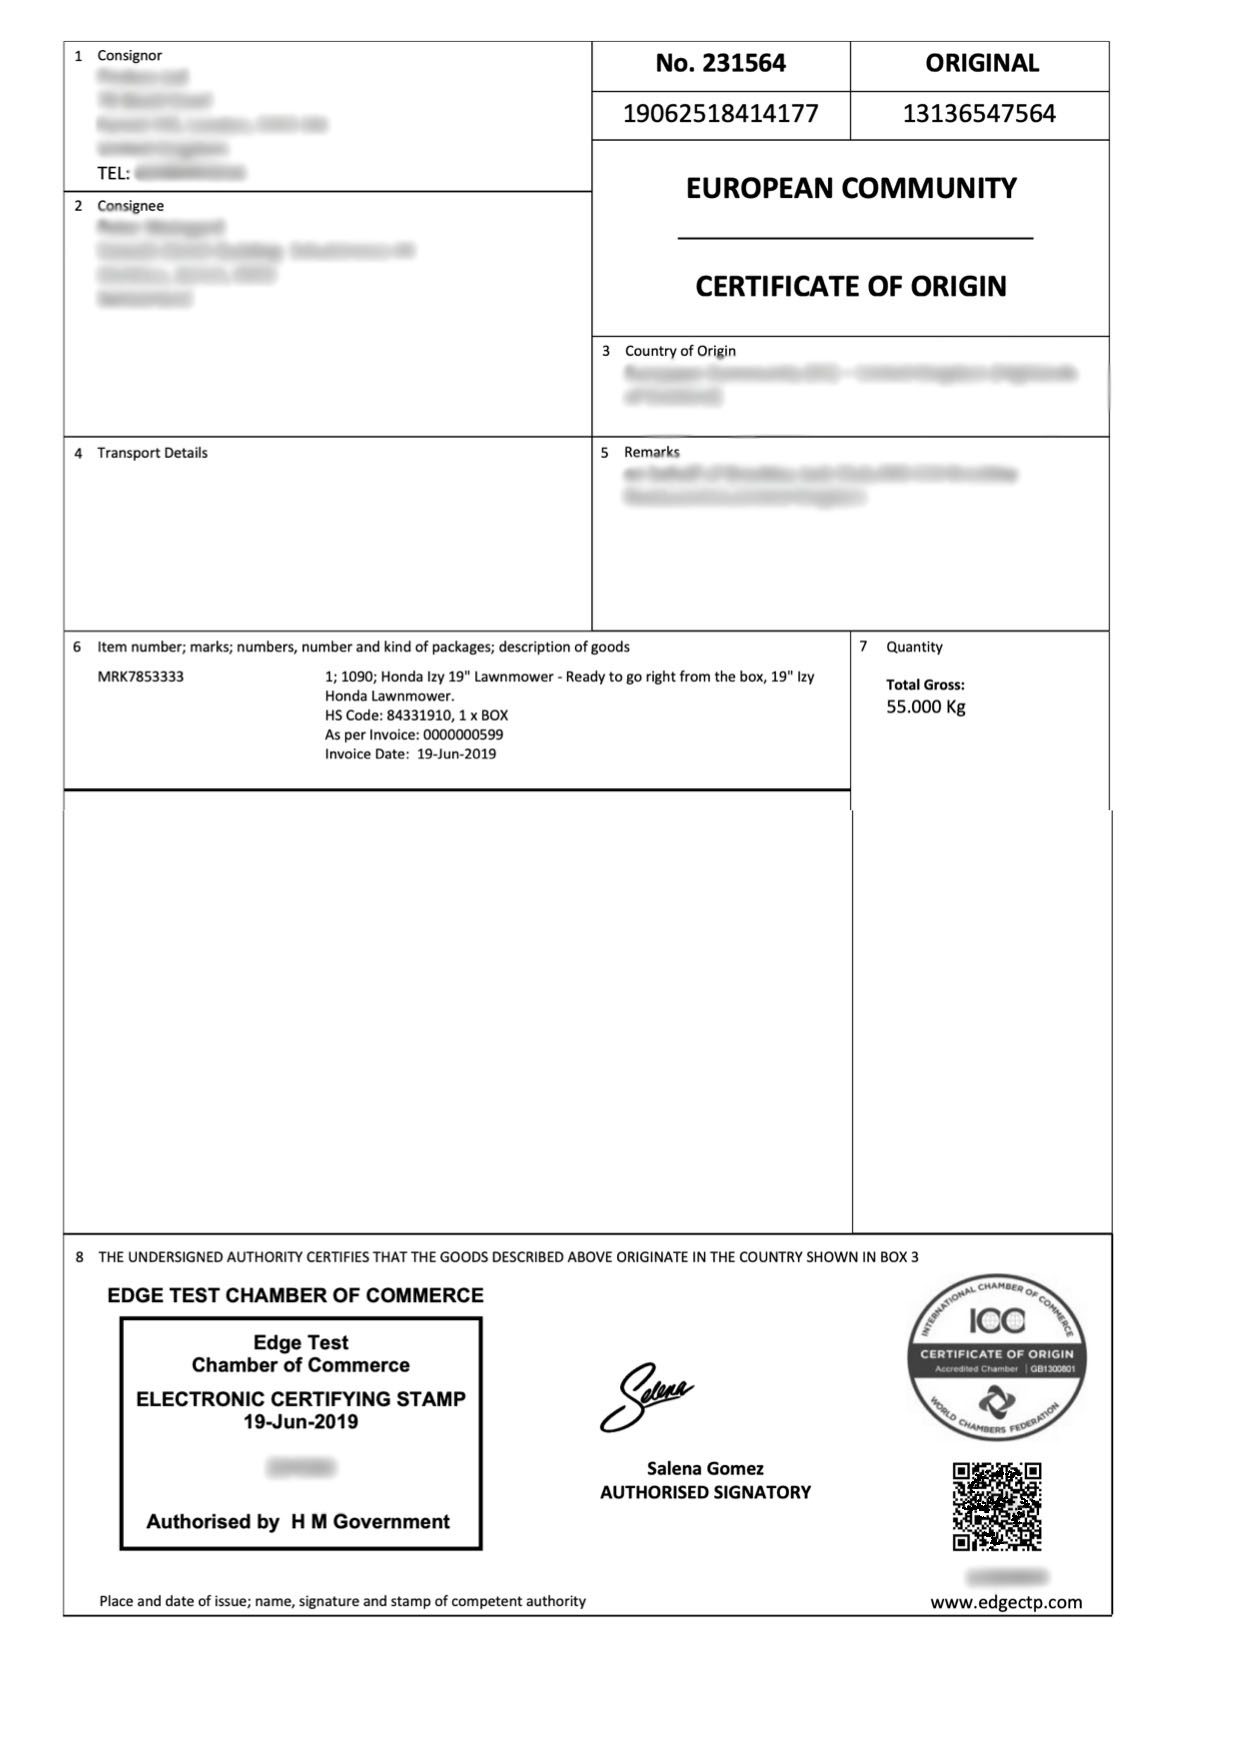 printed certificate with electronic stamps + signatures 